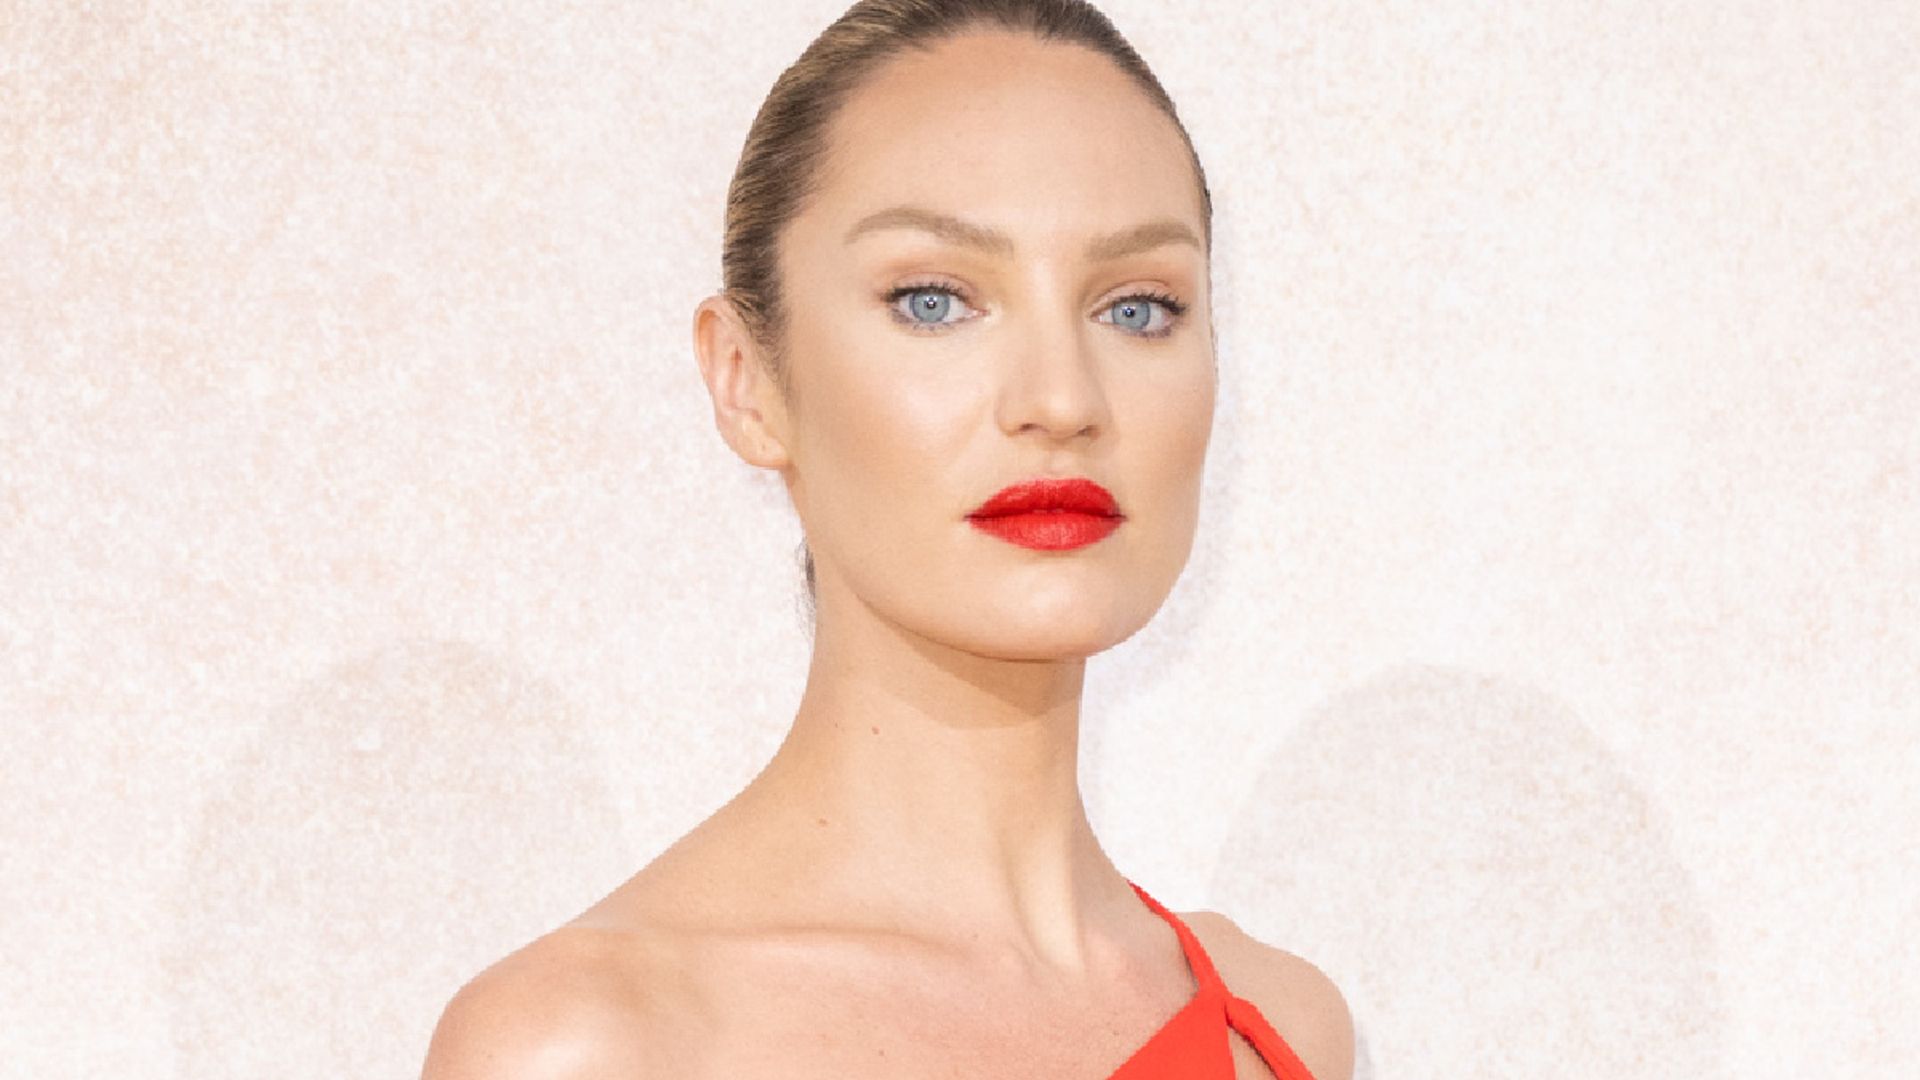 Where Is Supermodel Candice Swanepoel From?